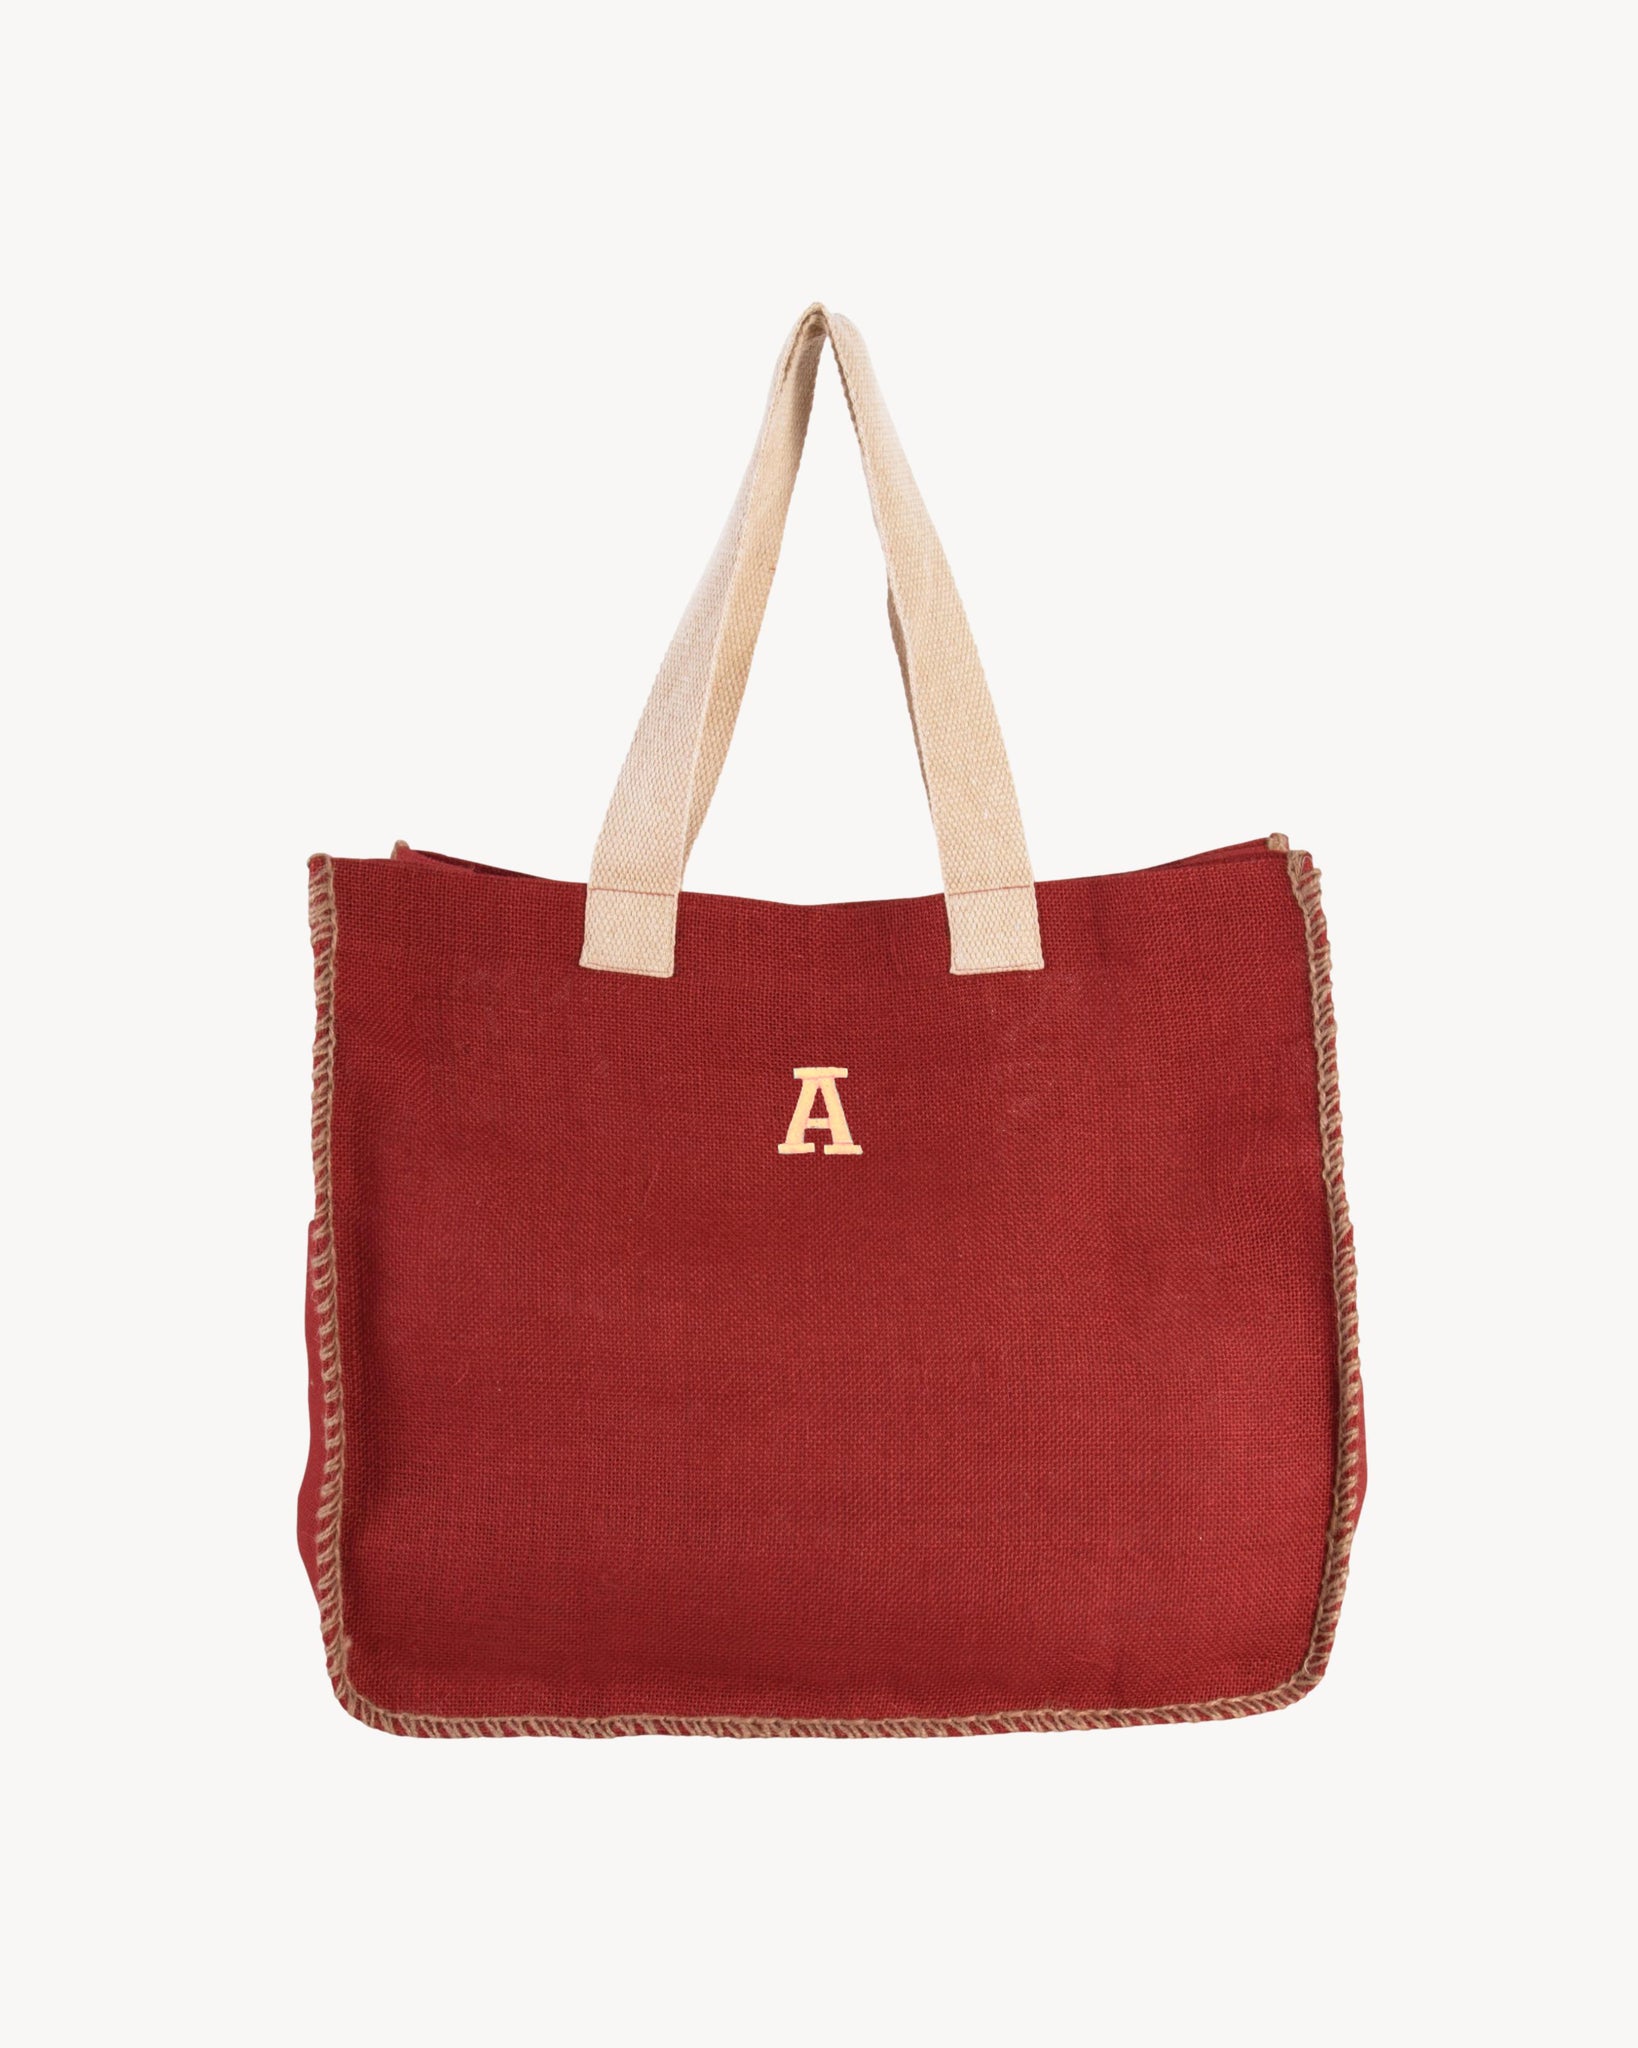 RED CONTRAST JUTE TOTE | PERSONALIZED